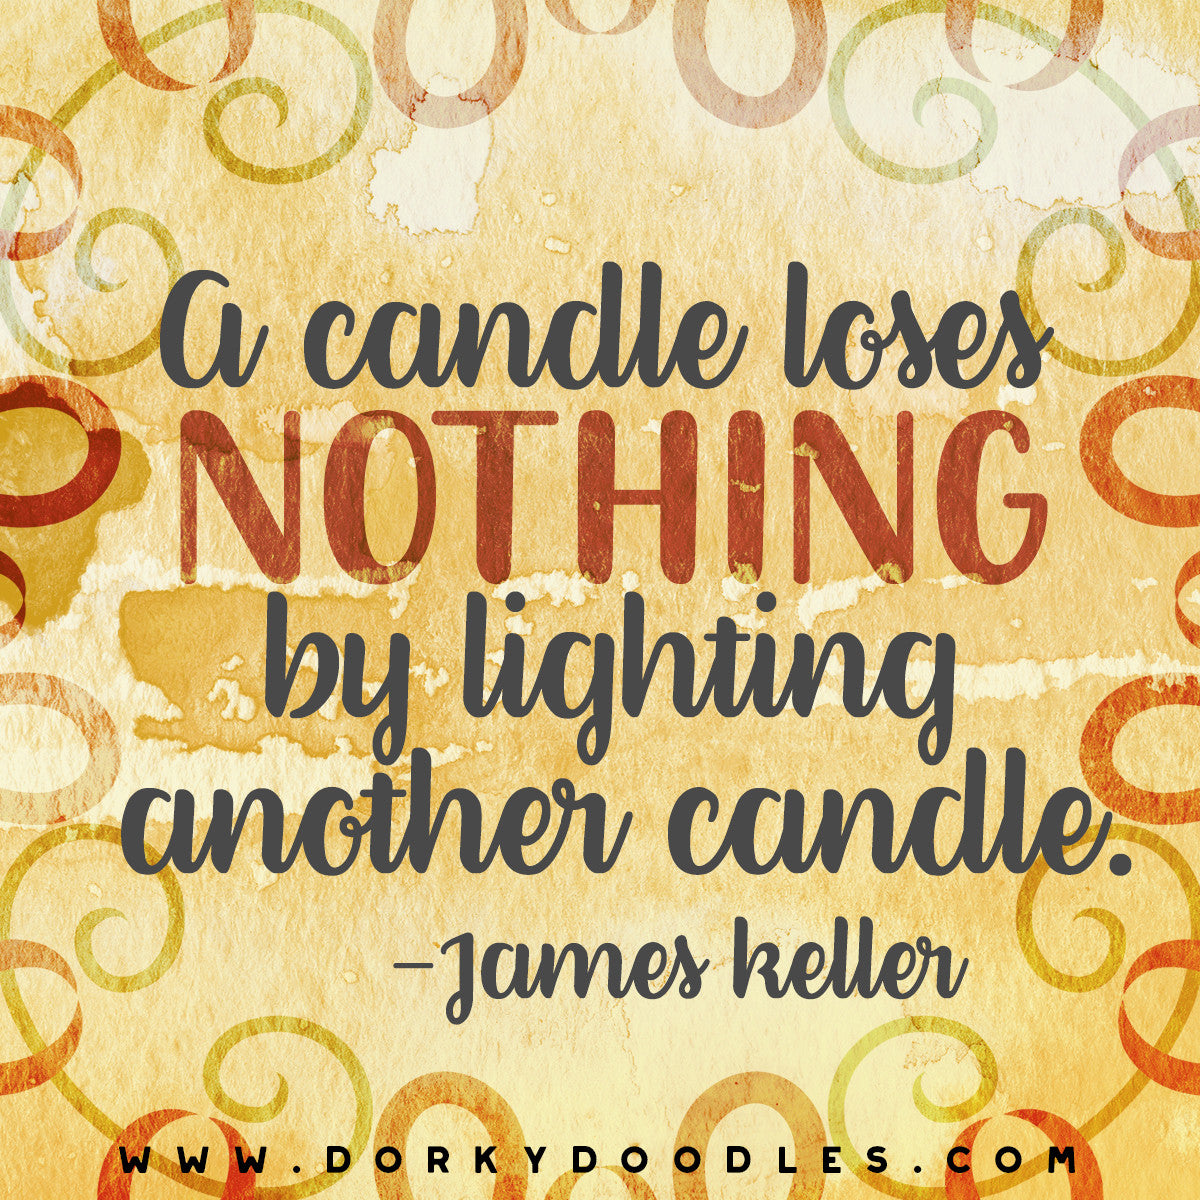 Motivational Monday: A Candle Loses Nothing – Dorky Doodles